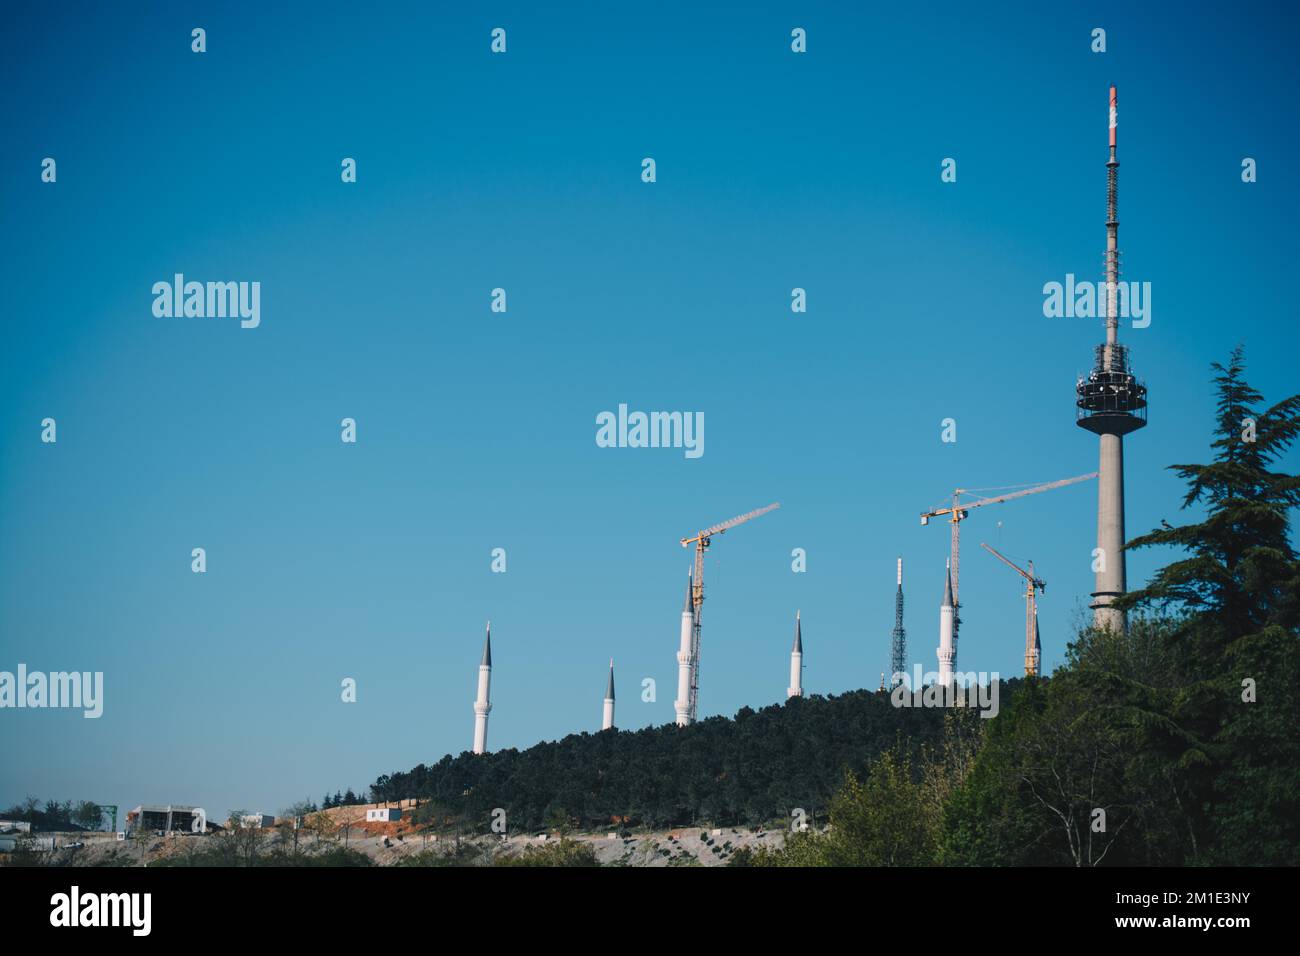 TV towers in Camlica, Istanbul, in a blue sky Stock Photo